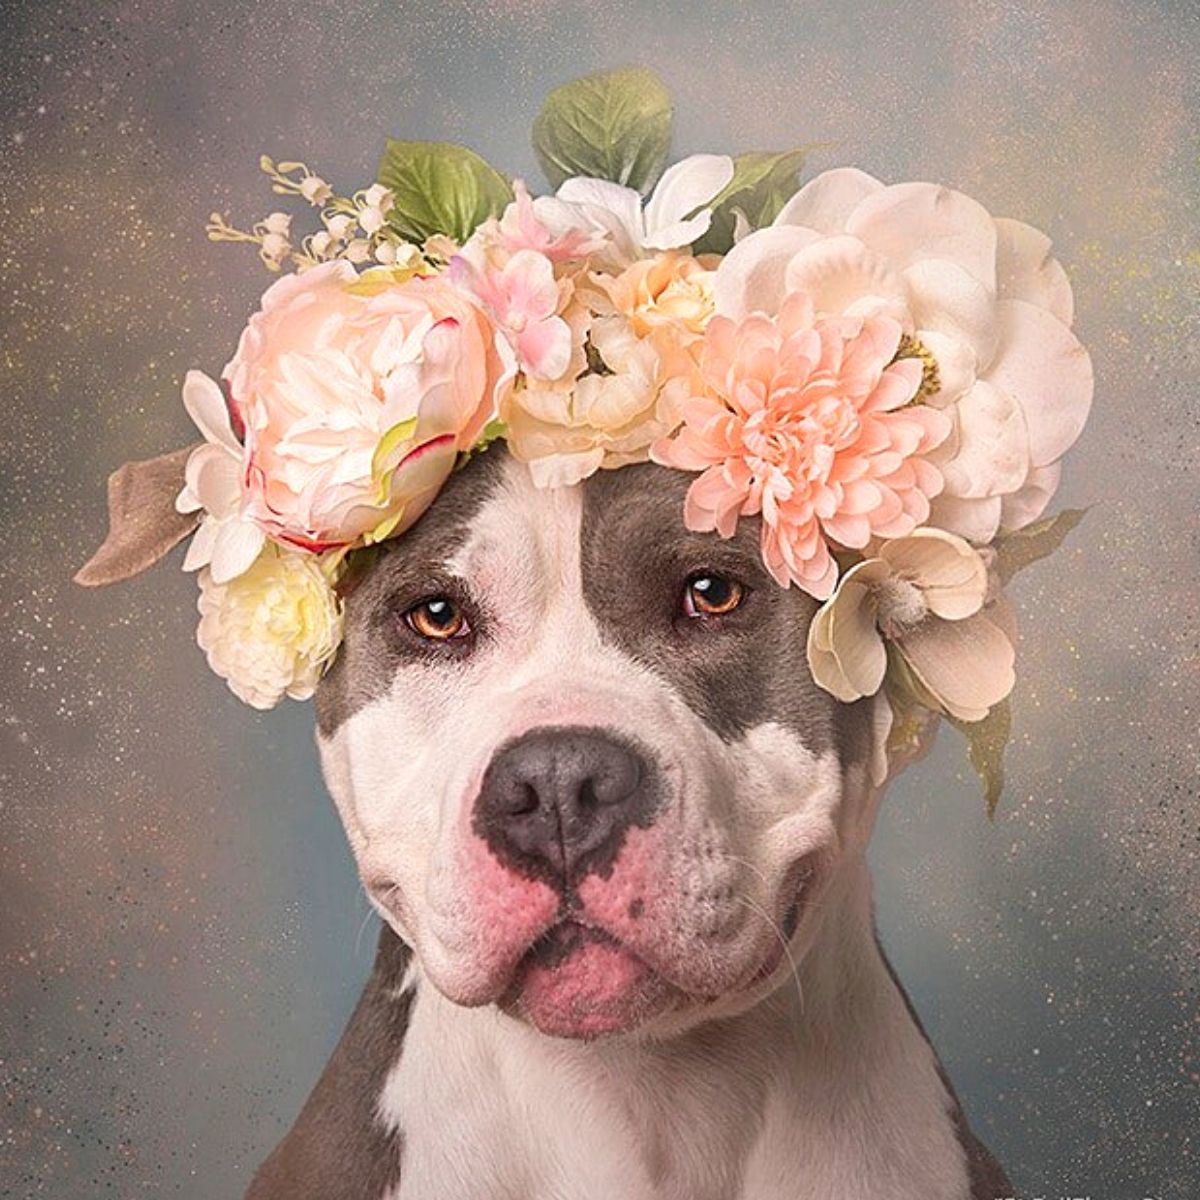 Sophie Gamand's Pitties and Flower Power, Pit Bulls of the Revolution